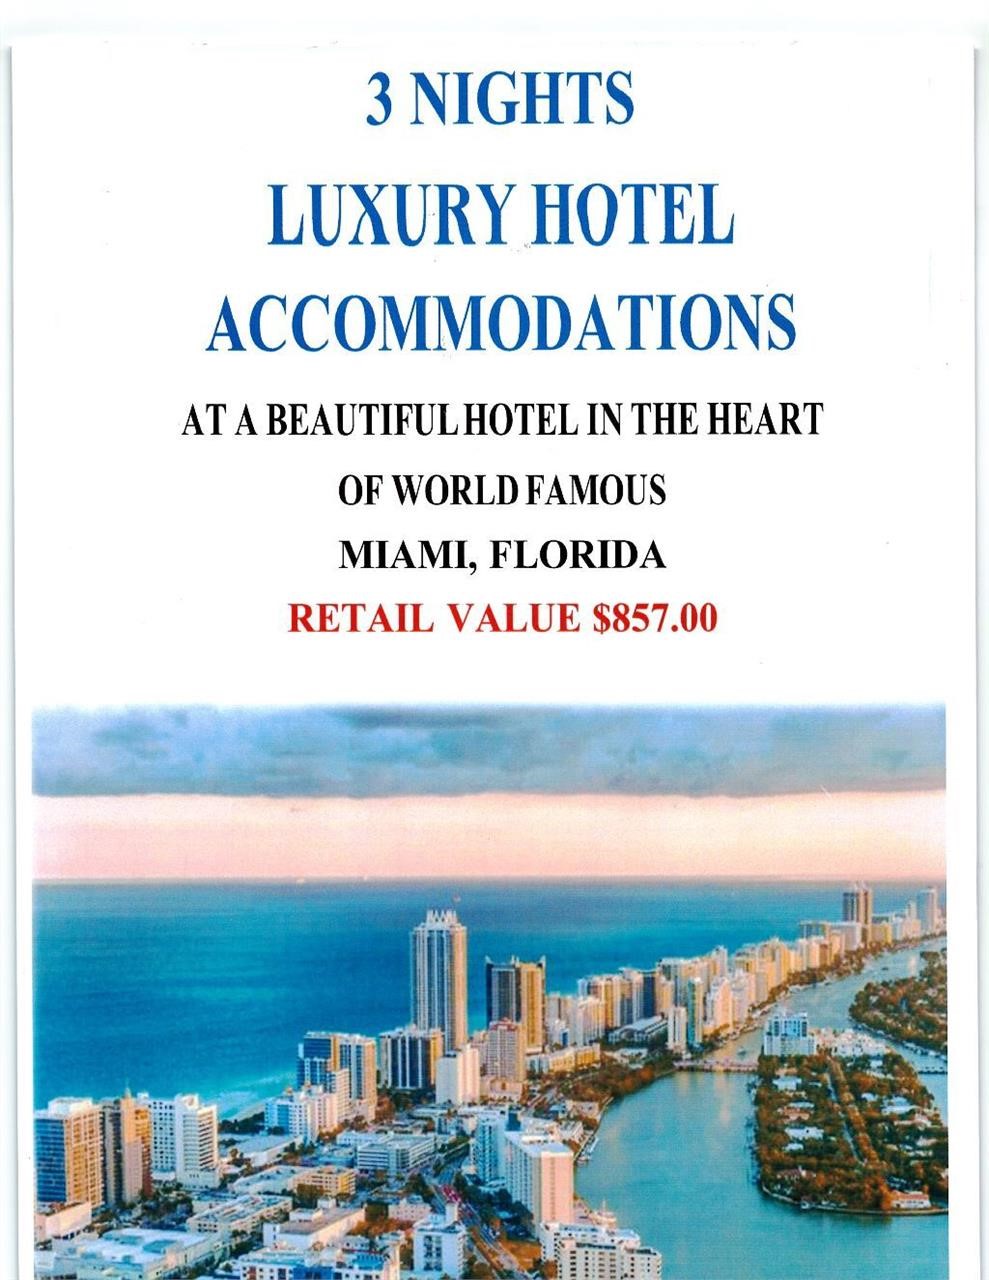 April 4TH. Vacation Hotel Accommodation Packages Auction